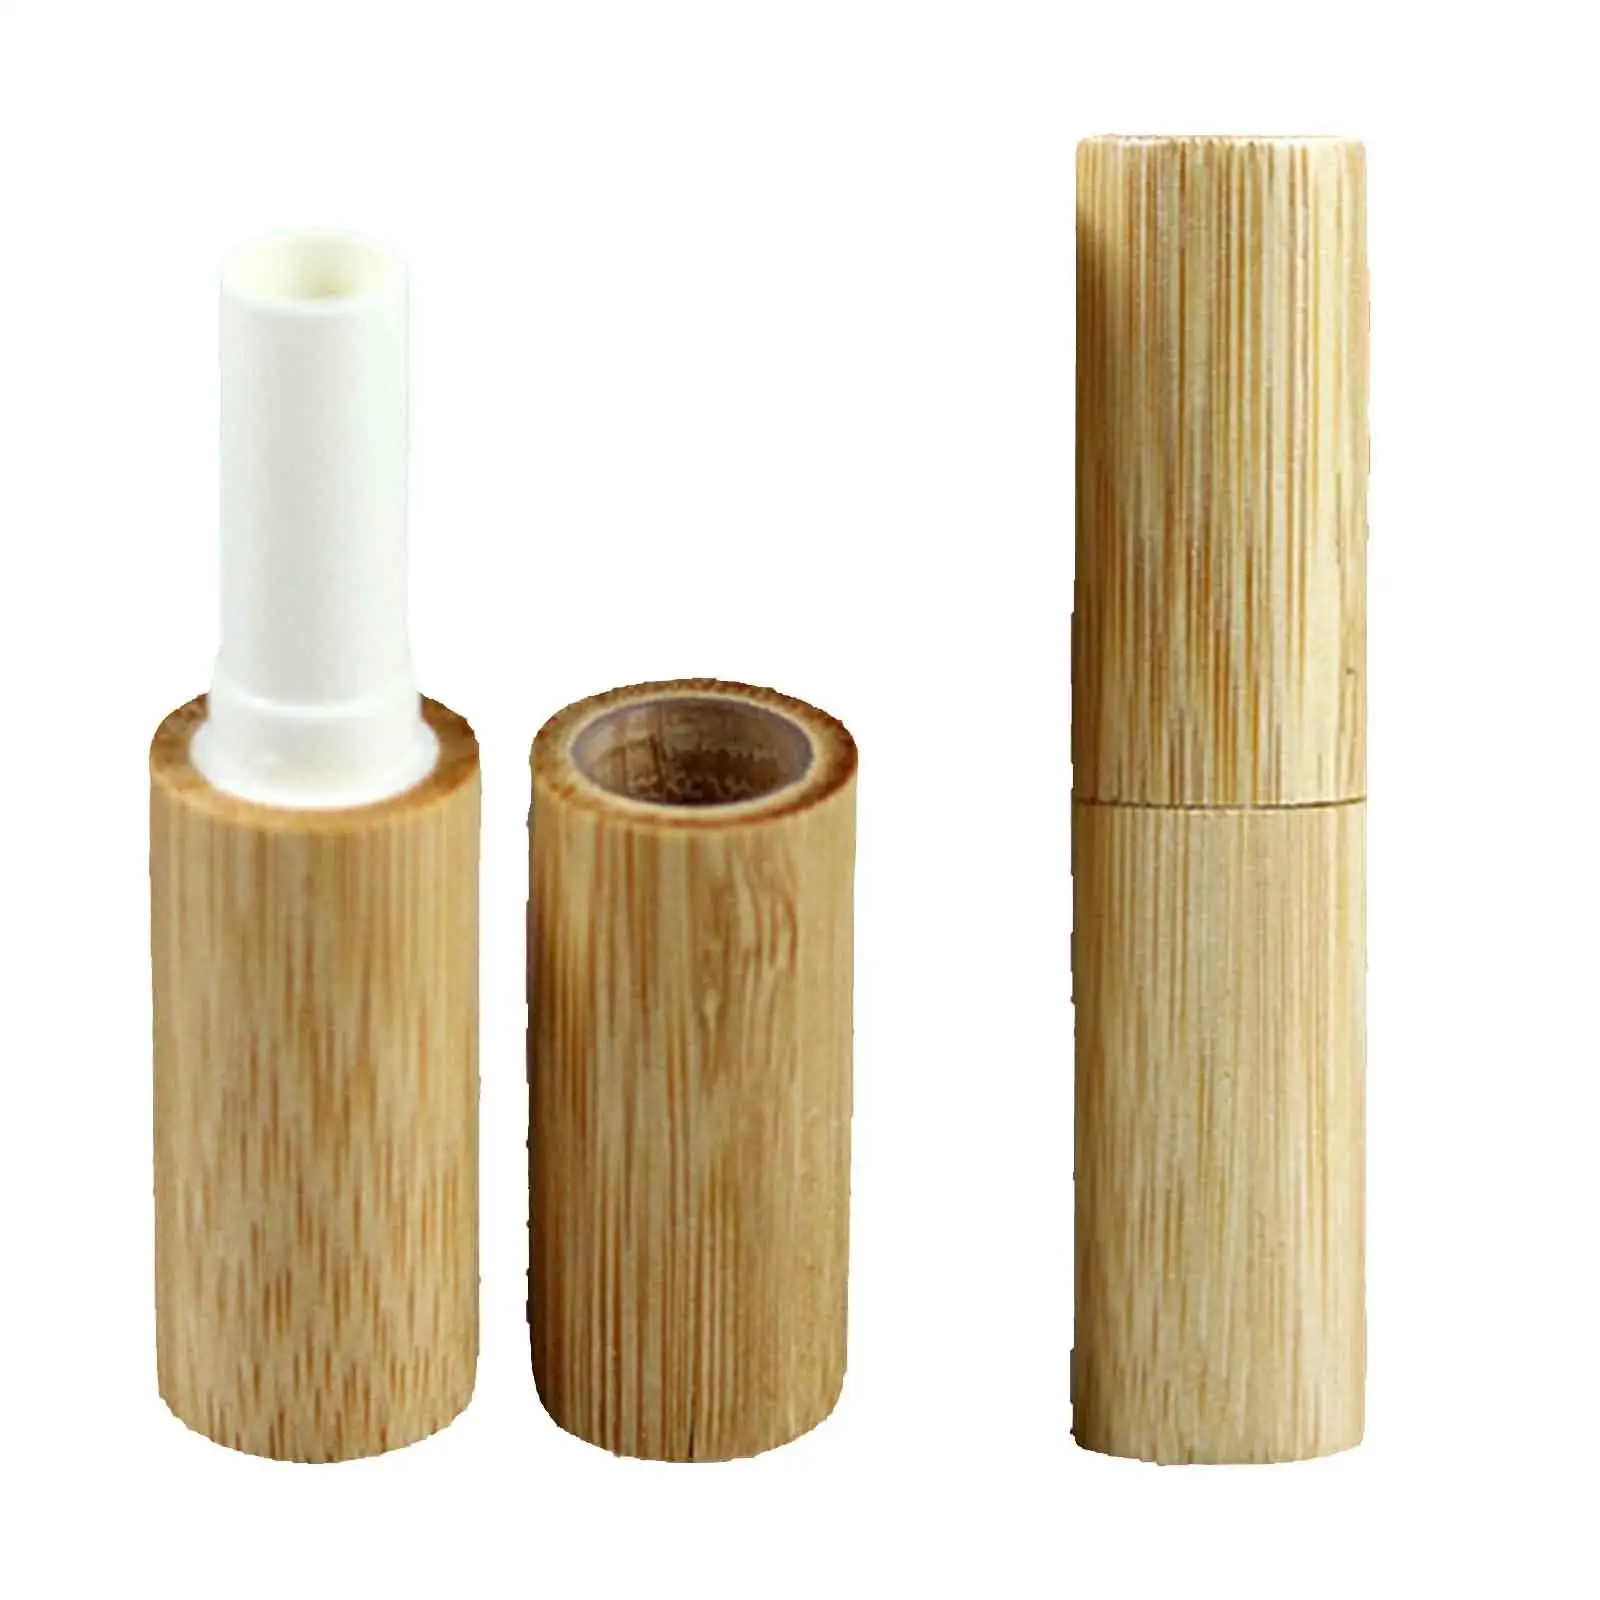 2x Lip Glosses Tubes Containers Empty Bamboo Shell Cosmetic Bottles Samples Lip Oils Tubes for Homemade Lip Balms